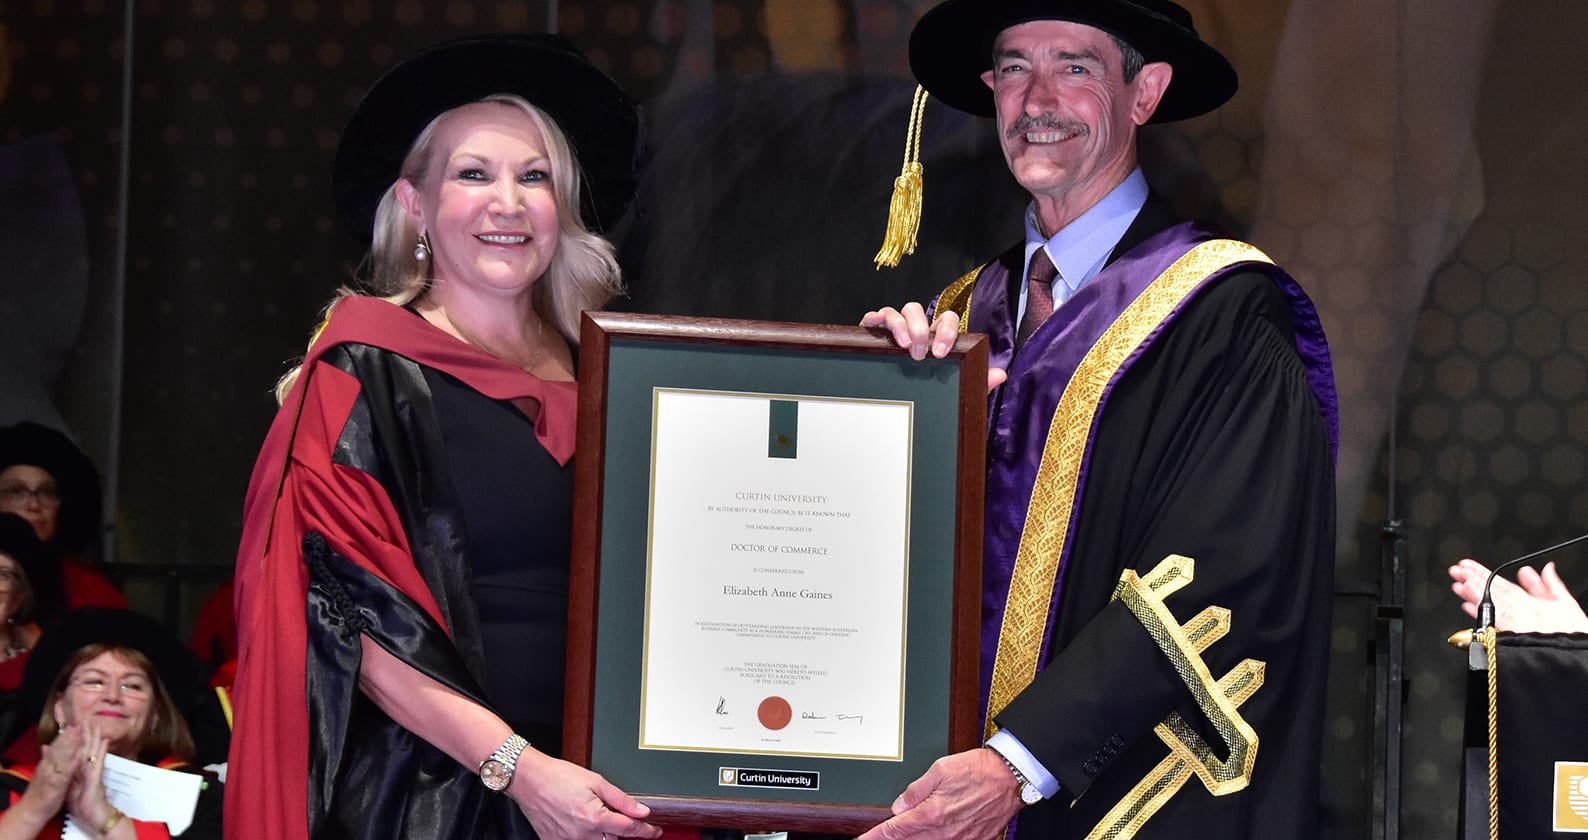 Image for Leading WA mining boss named Honorary Doctor of Curtin